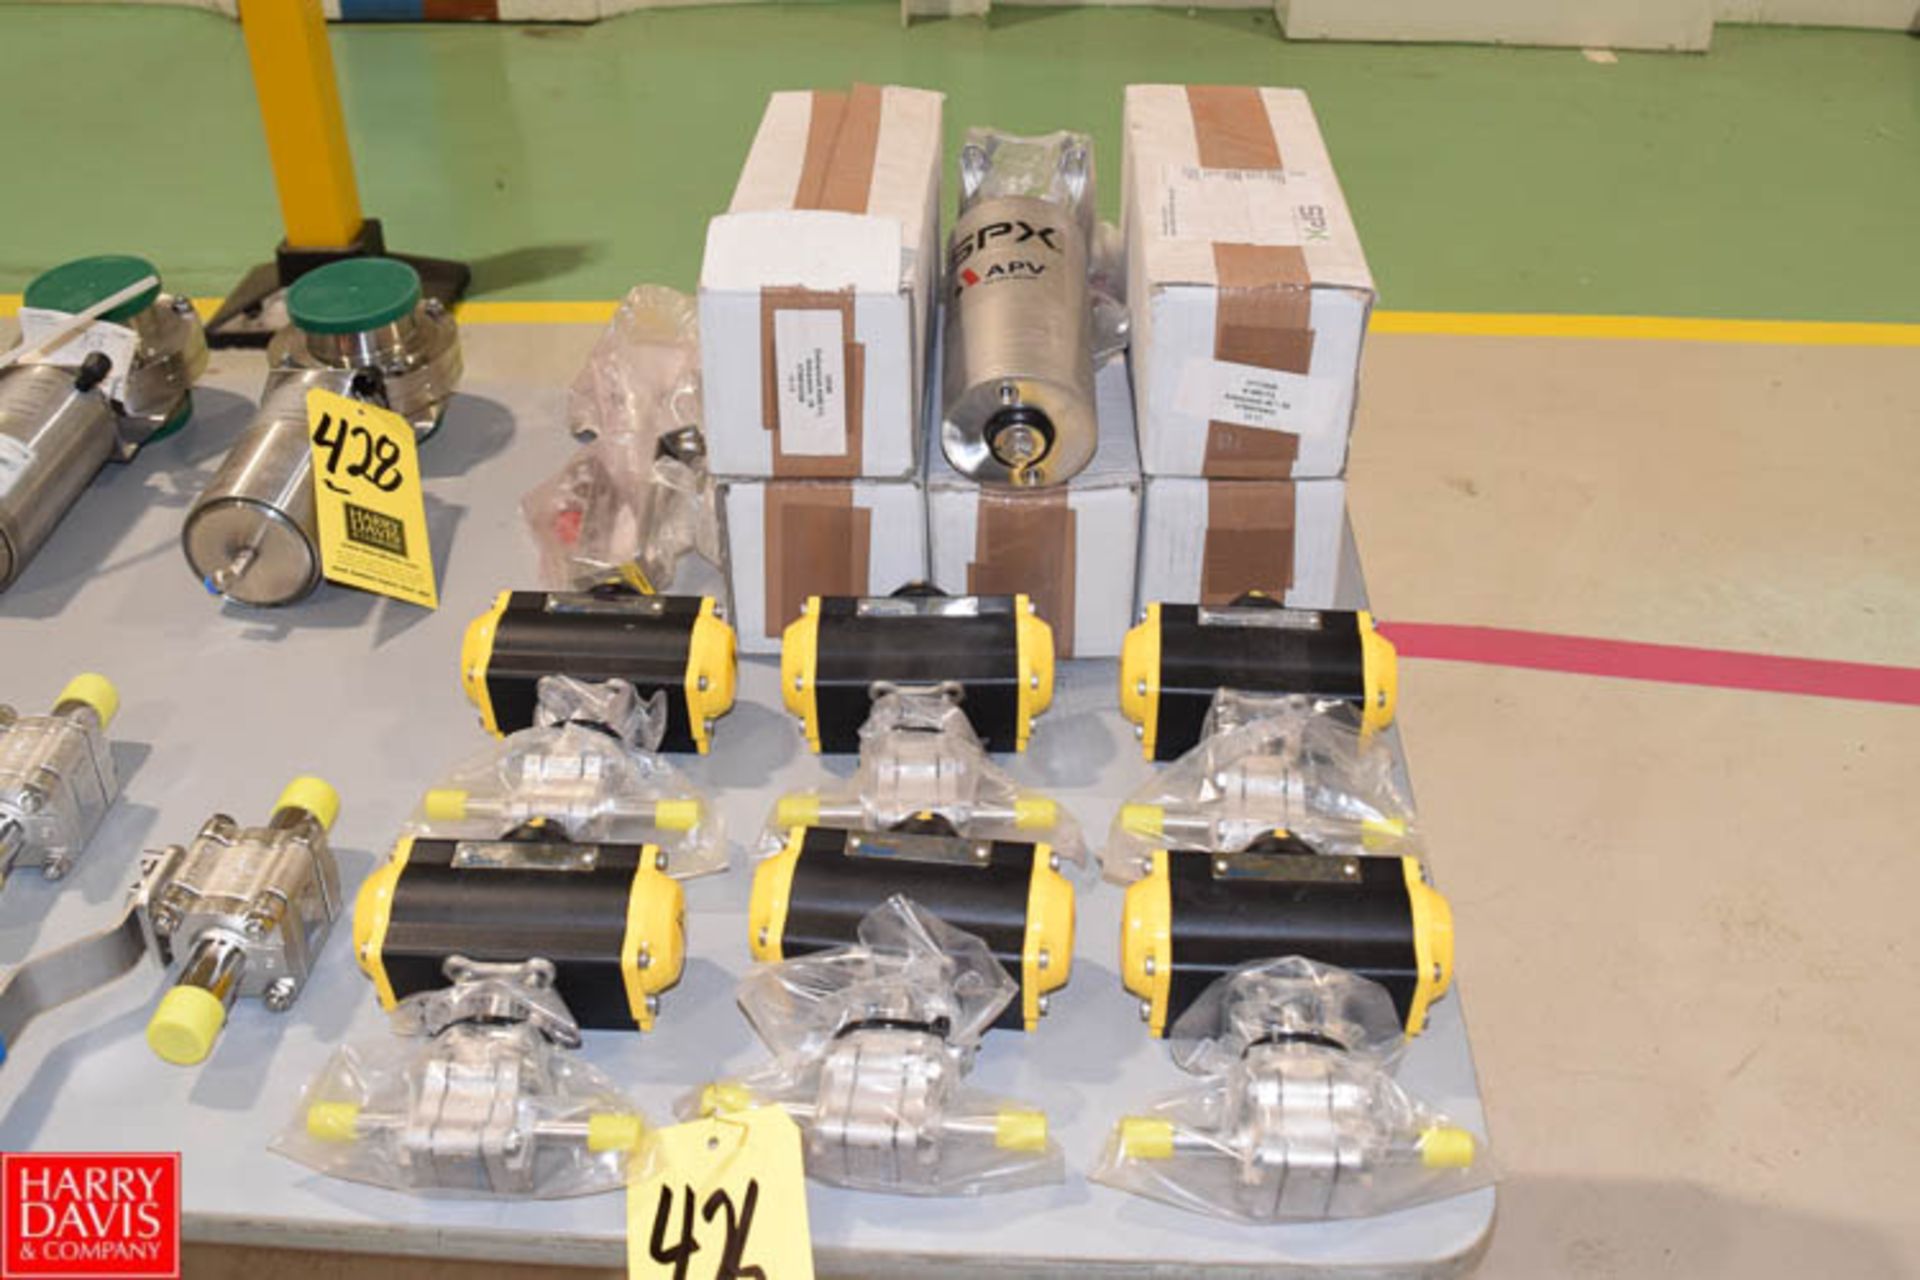 NEW .5" Air-Actuated Ball Valves and APV S/S Actuators - Rigging Fee $ 65